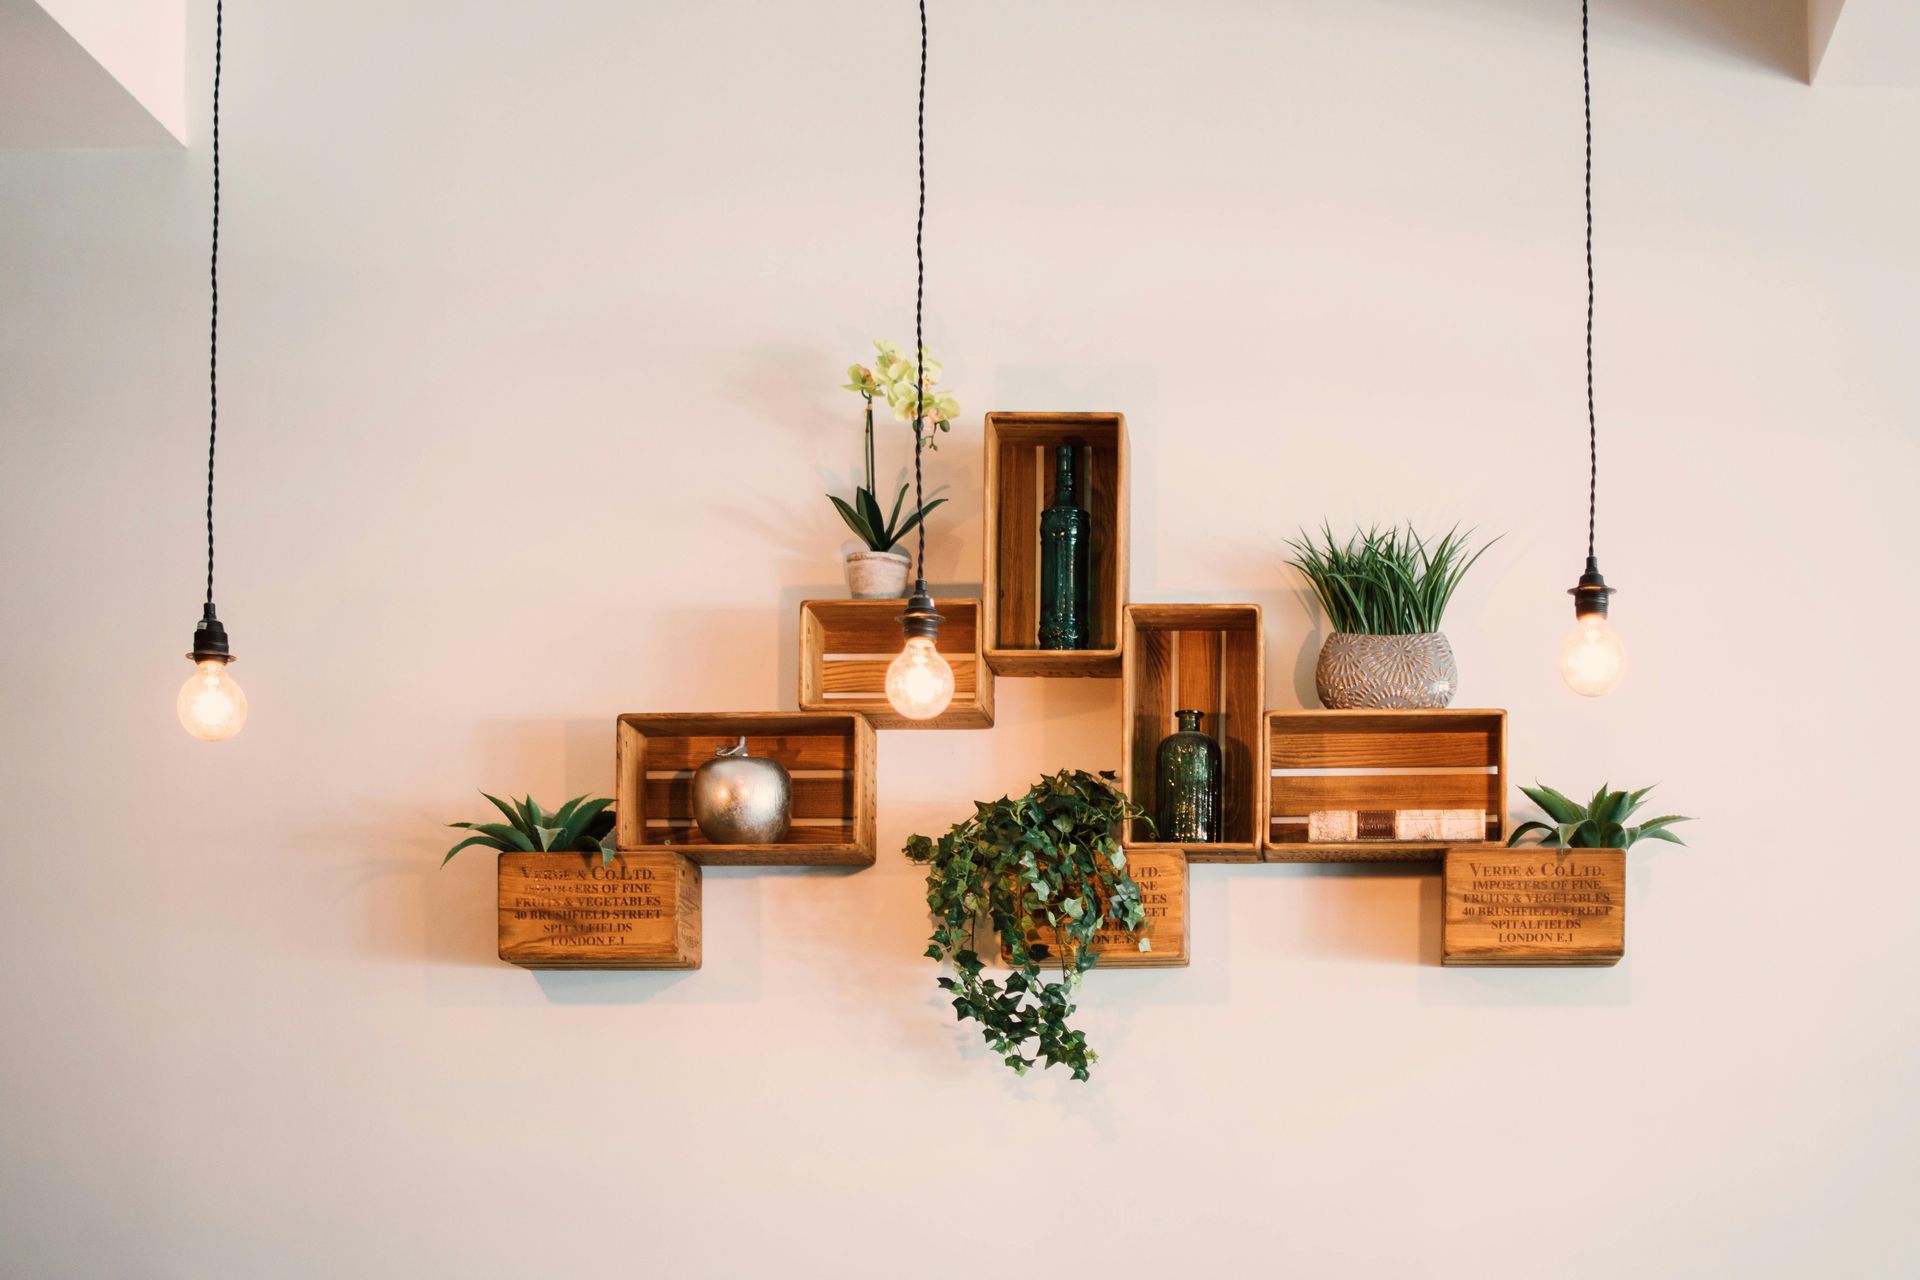 shelving with plants and lights